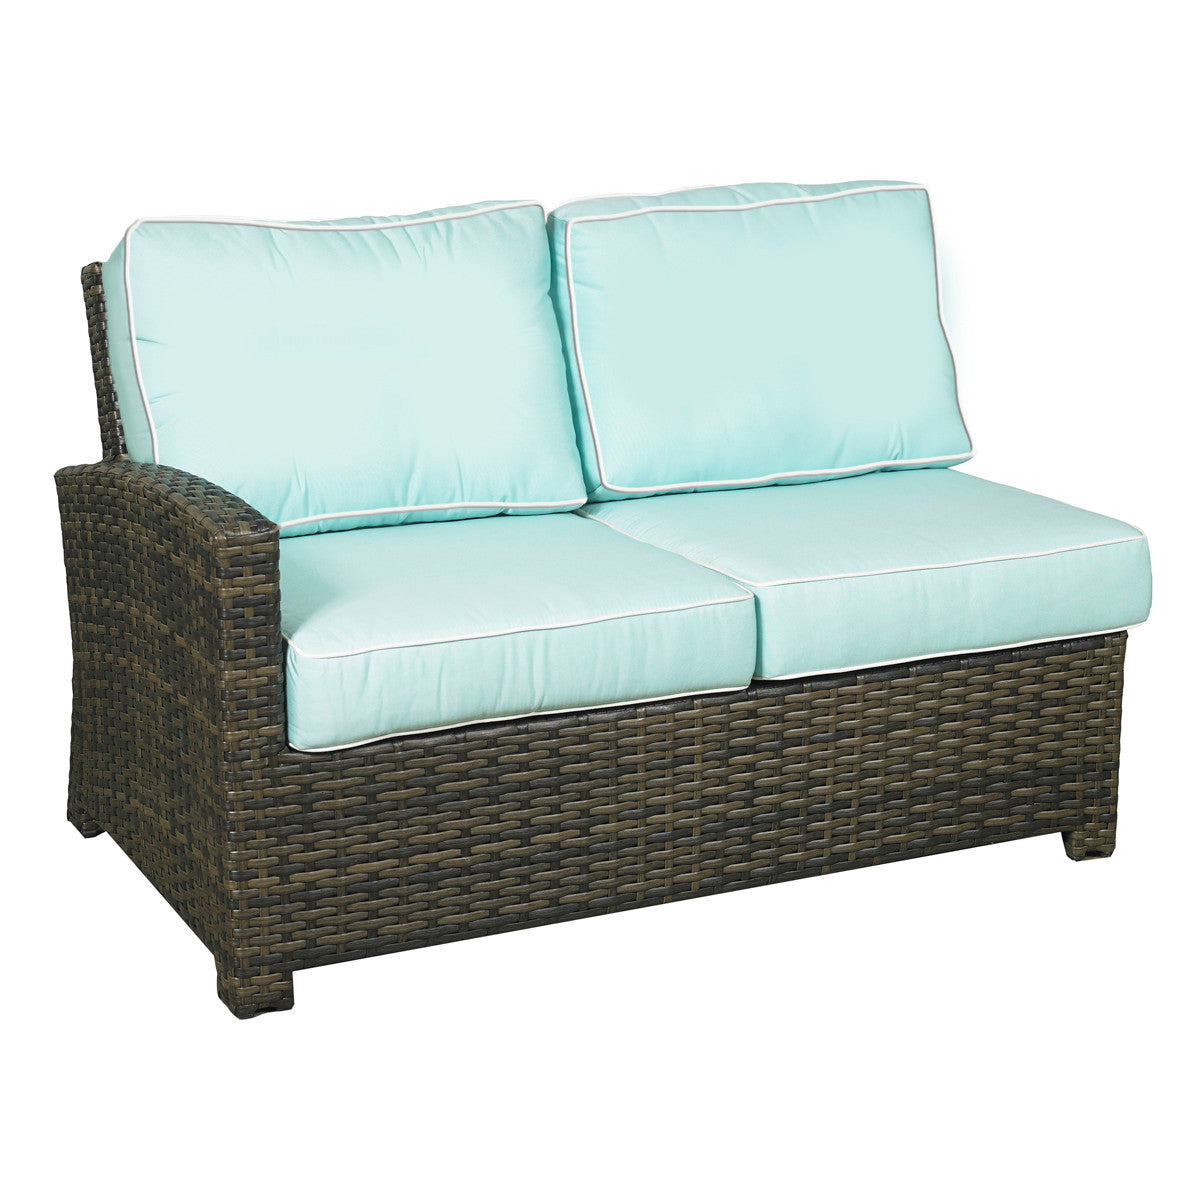 Forever Patio Brookside Wicker Sectional Left Arm Facing Loveseat